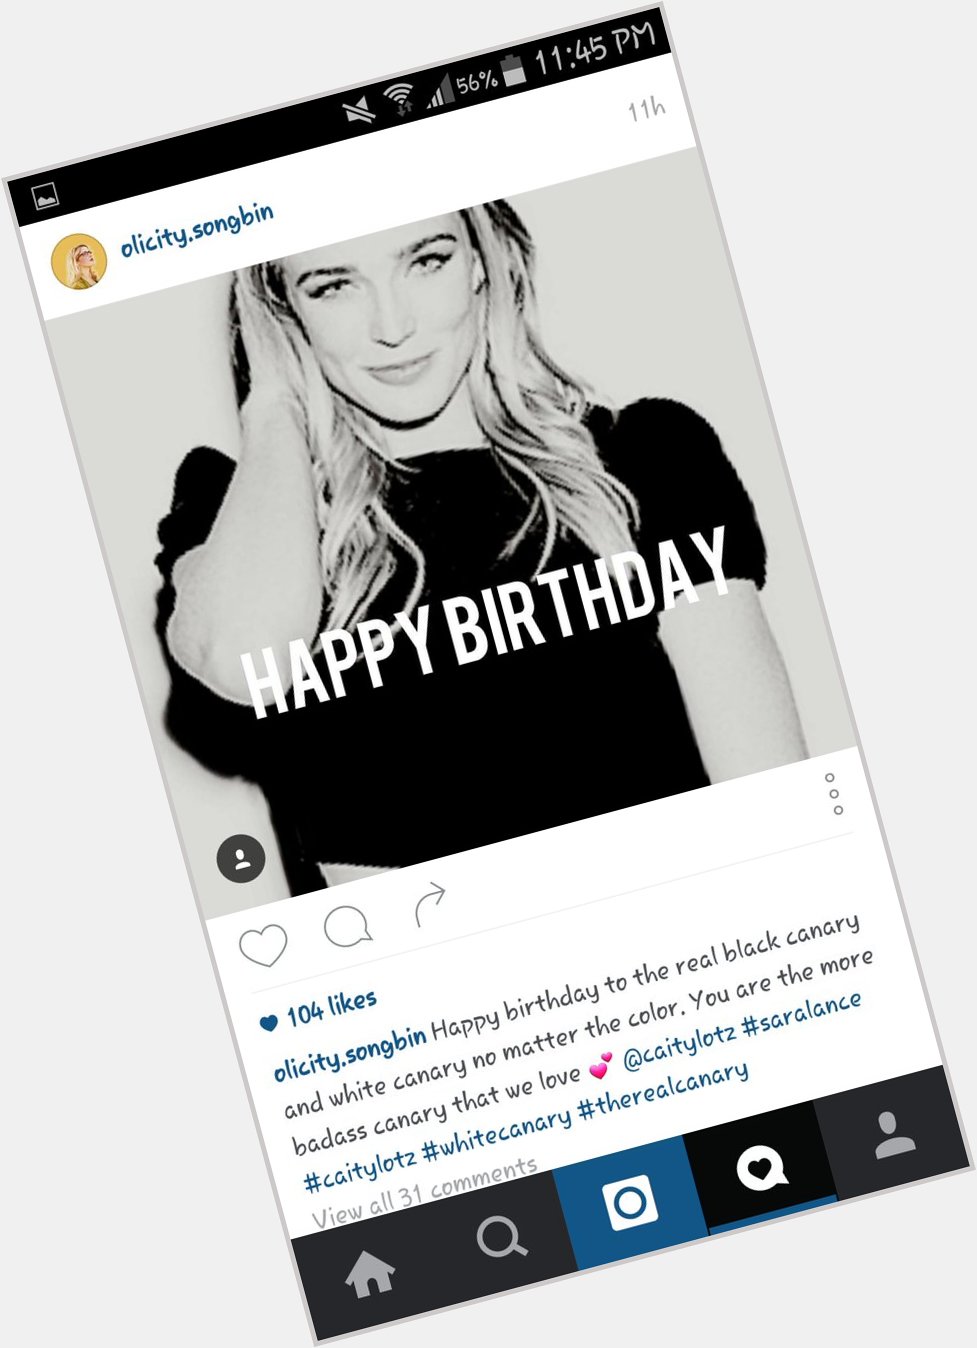 CAITY LOTZ LIKE MY HAPPY BIRTHDAY POST ON IG!!!! and I call her the real BC     she knows  